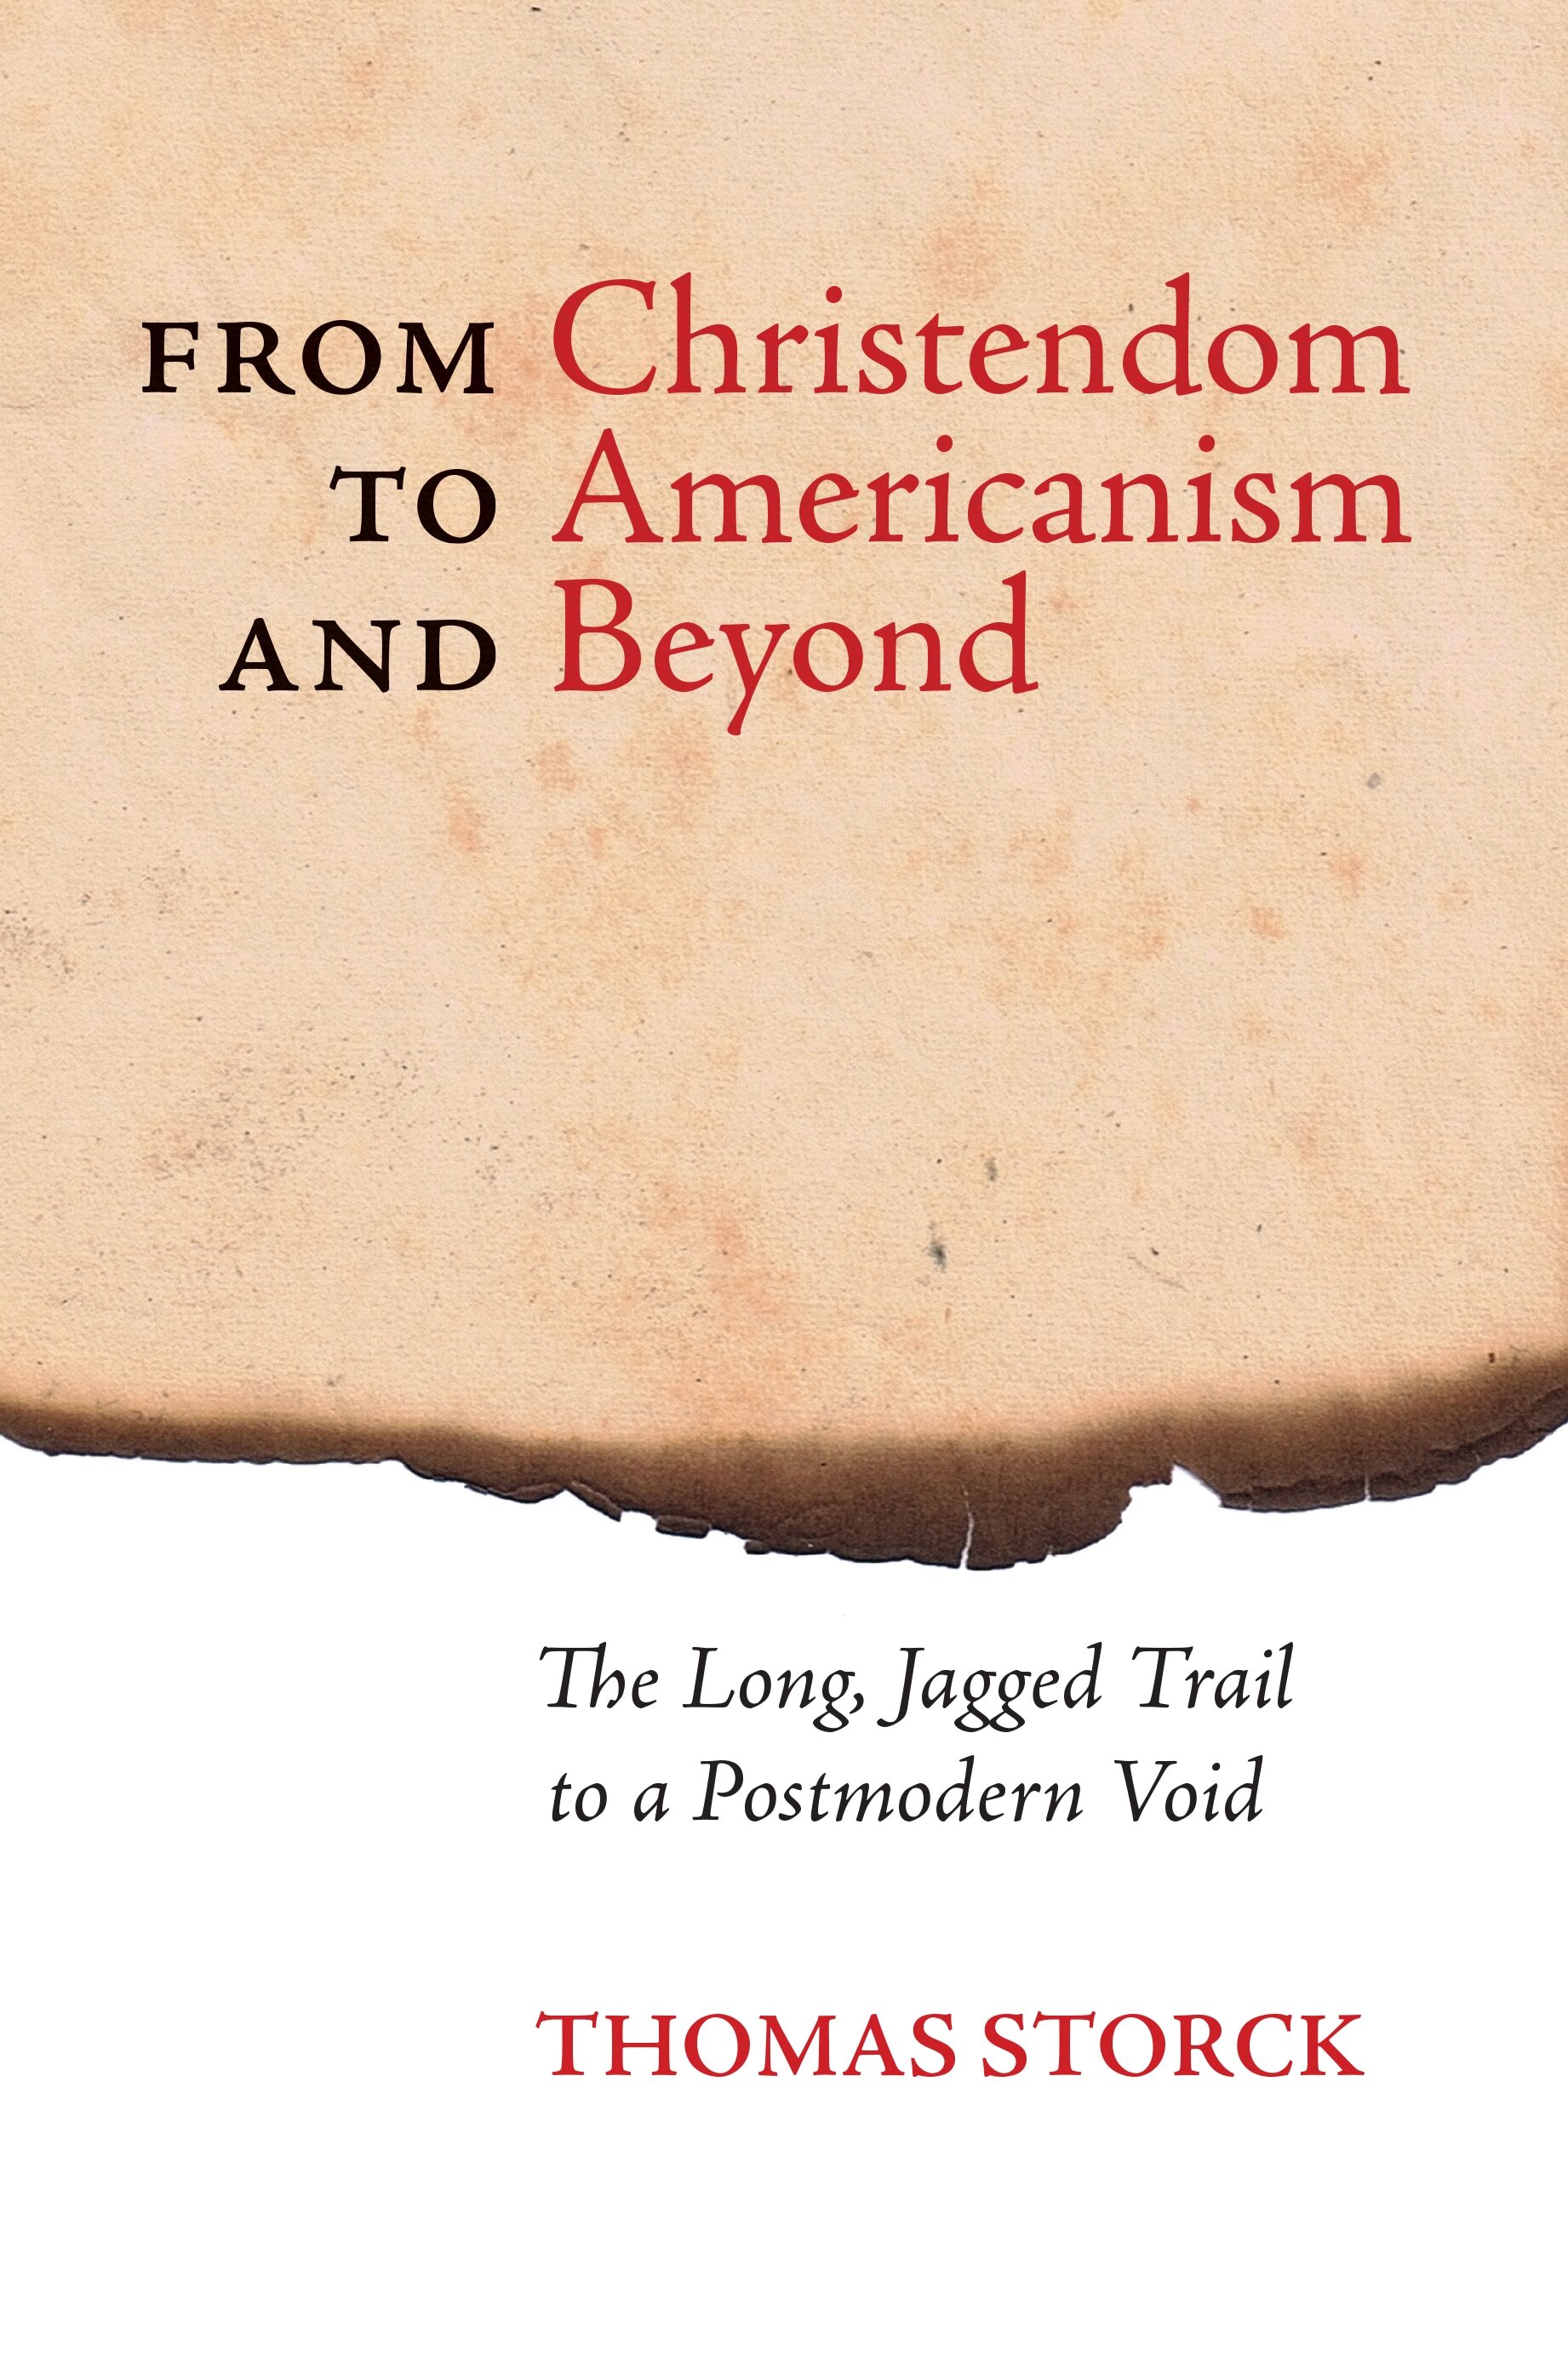 From Christendom to Americanism